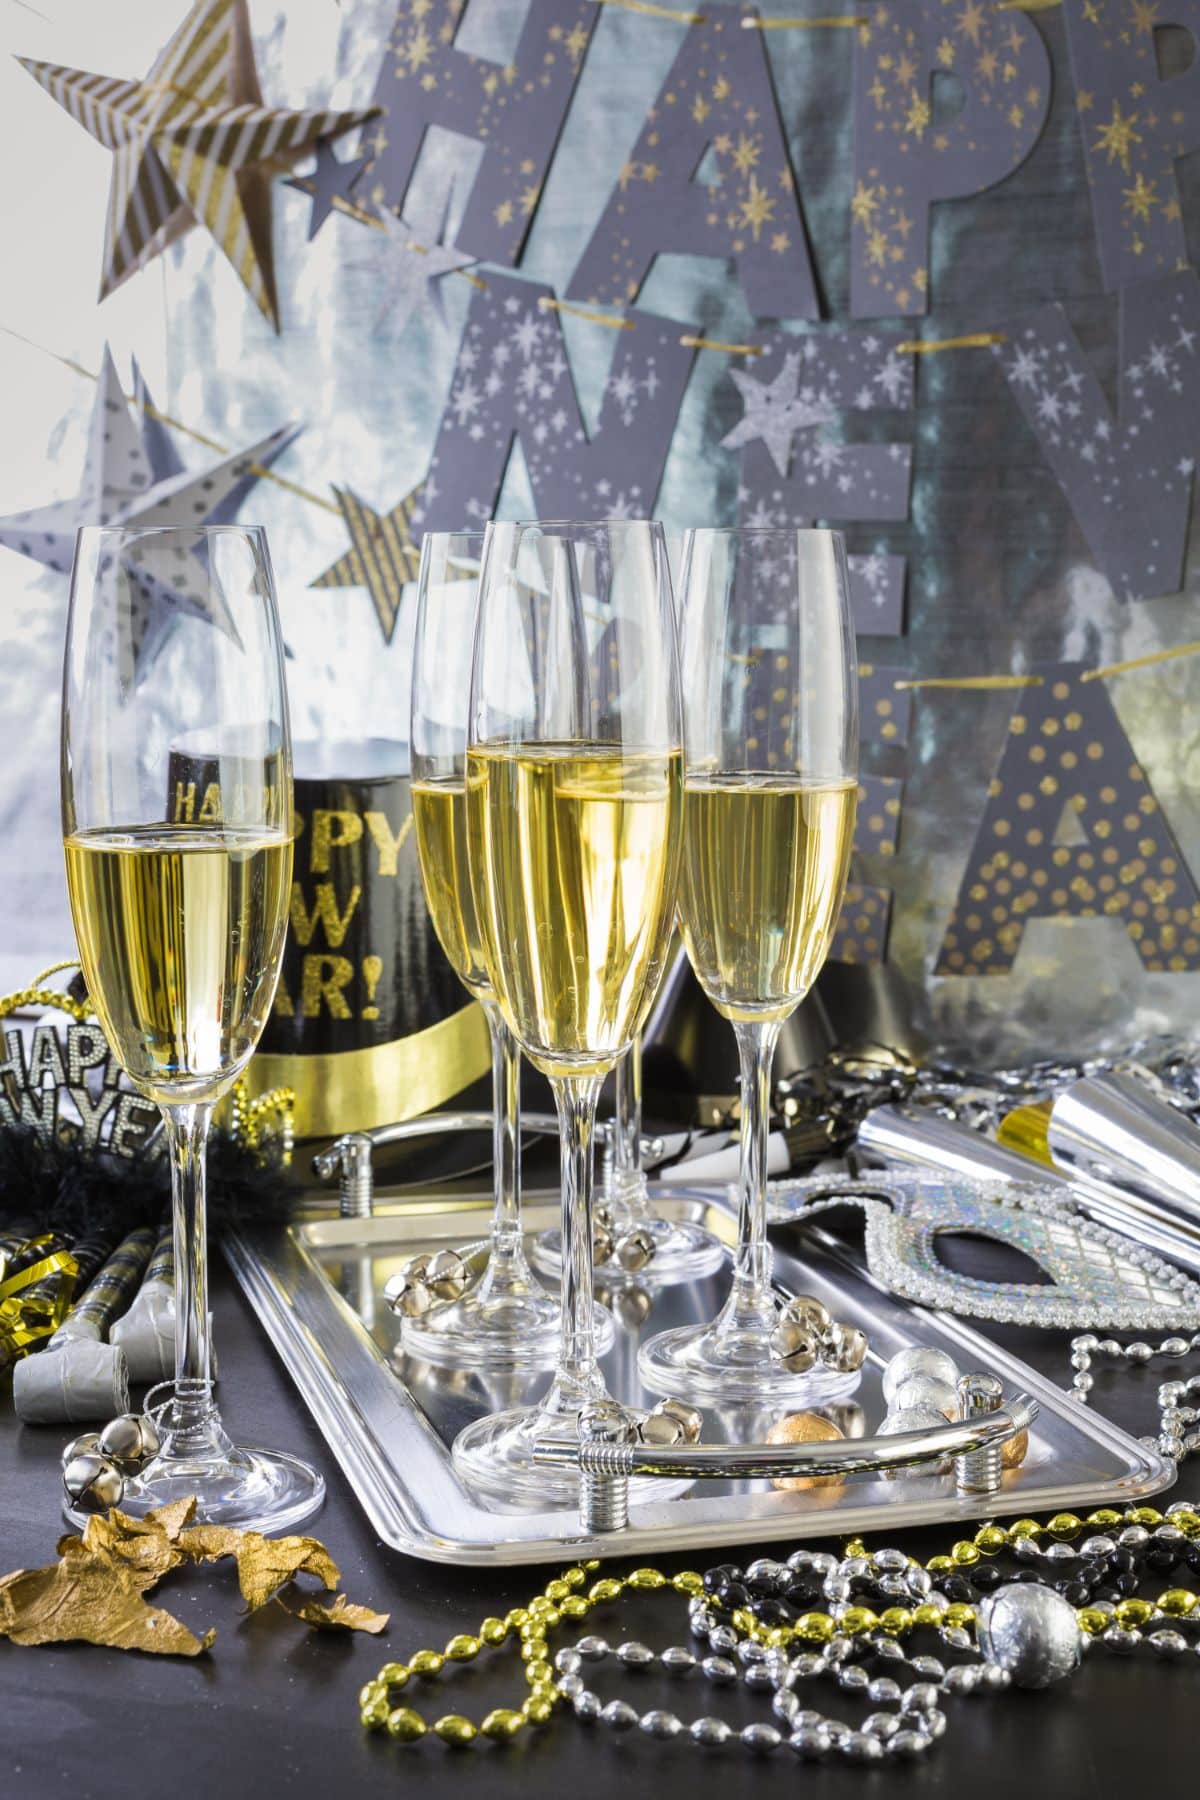 New Year's party with glasses of champagne on a silver tray and gold and silver beads.